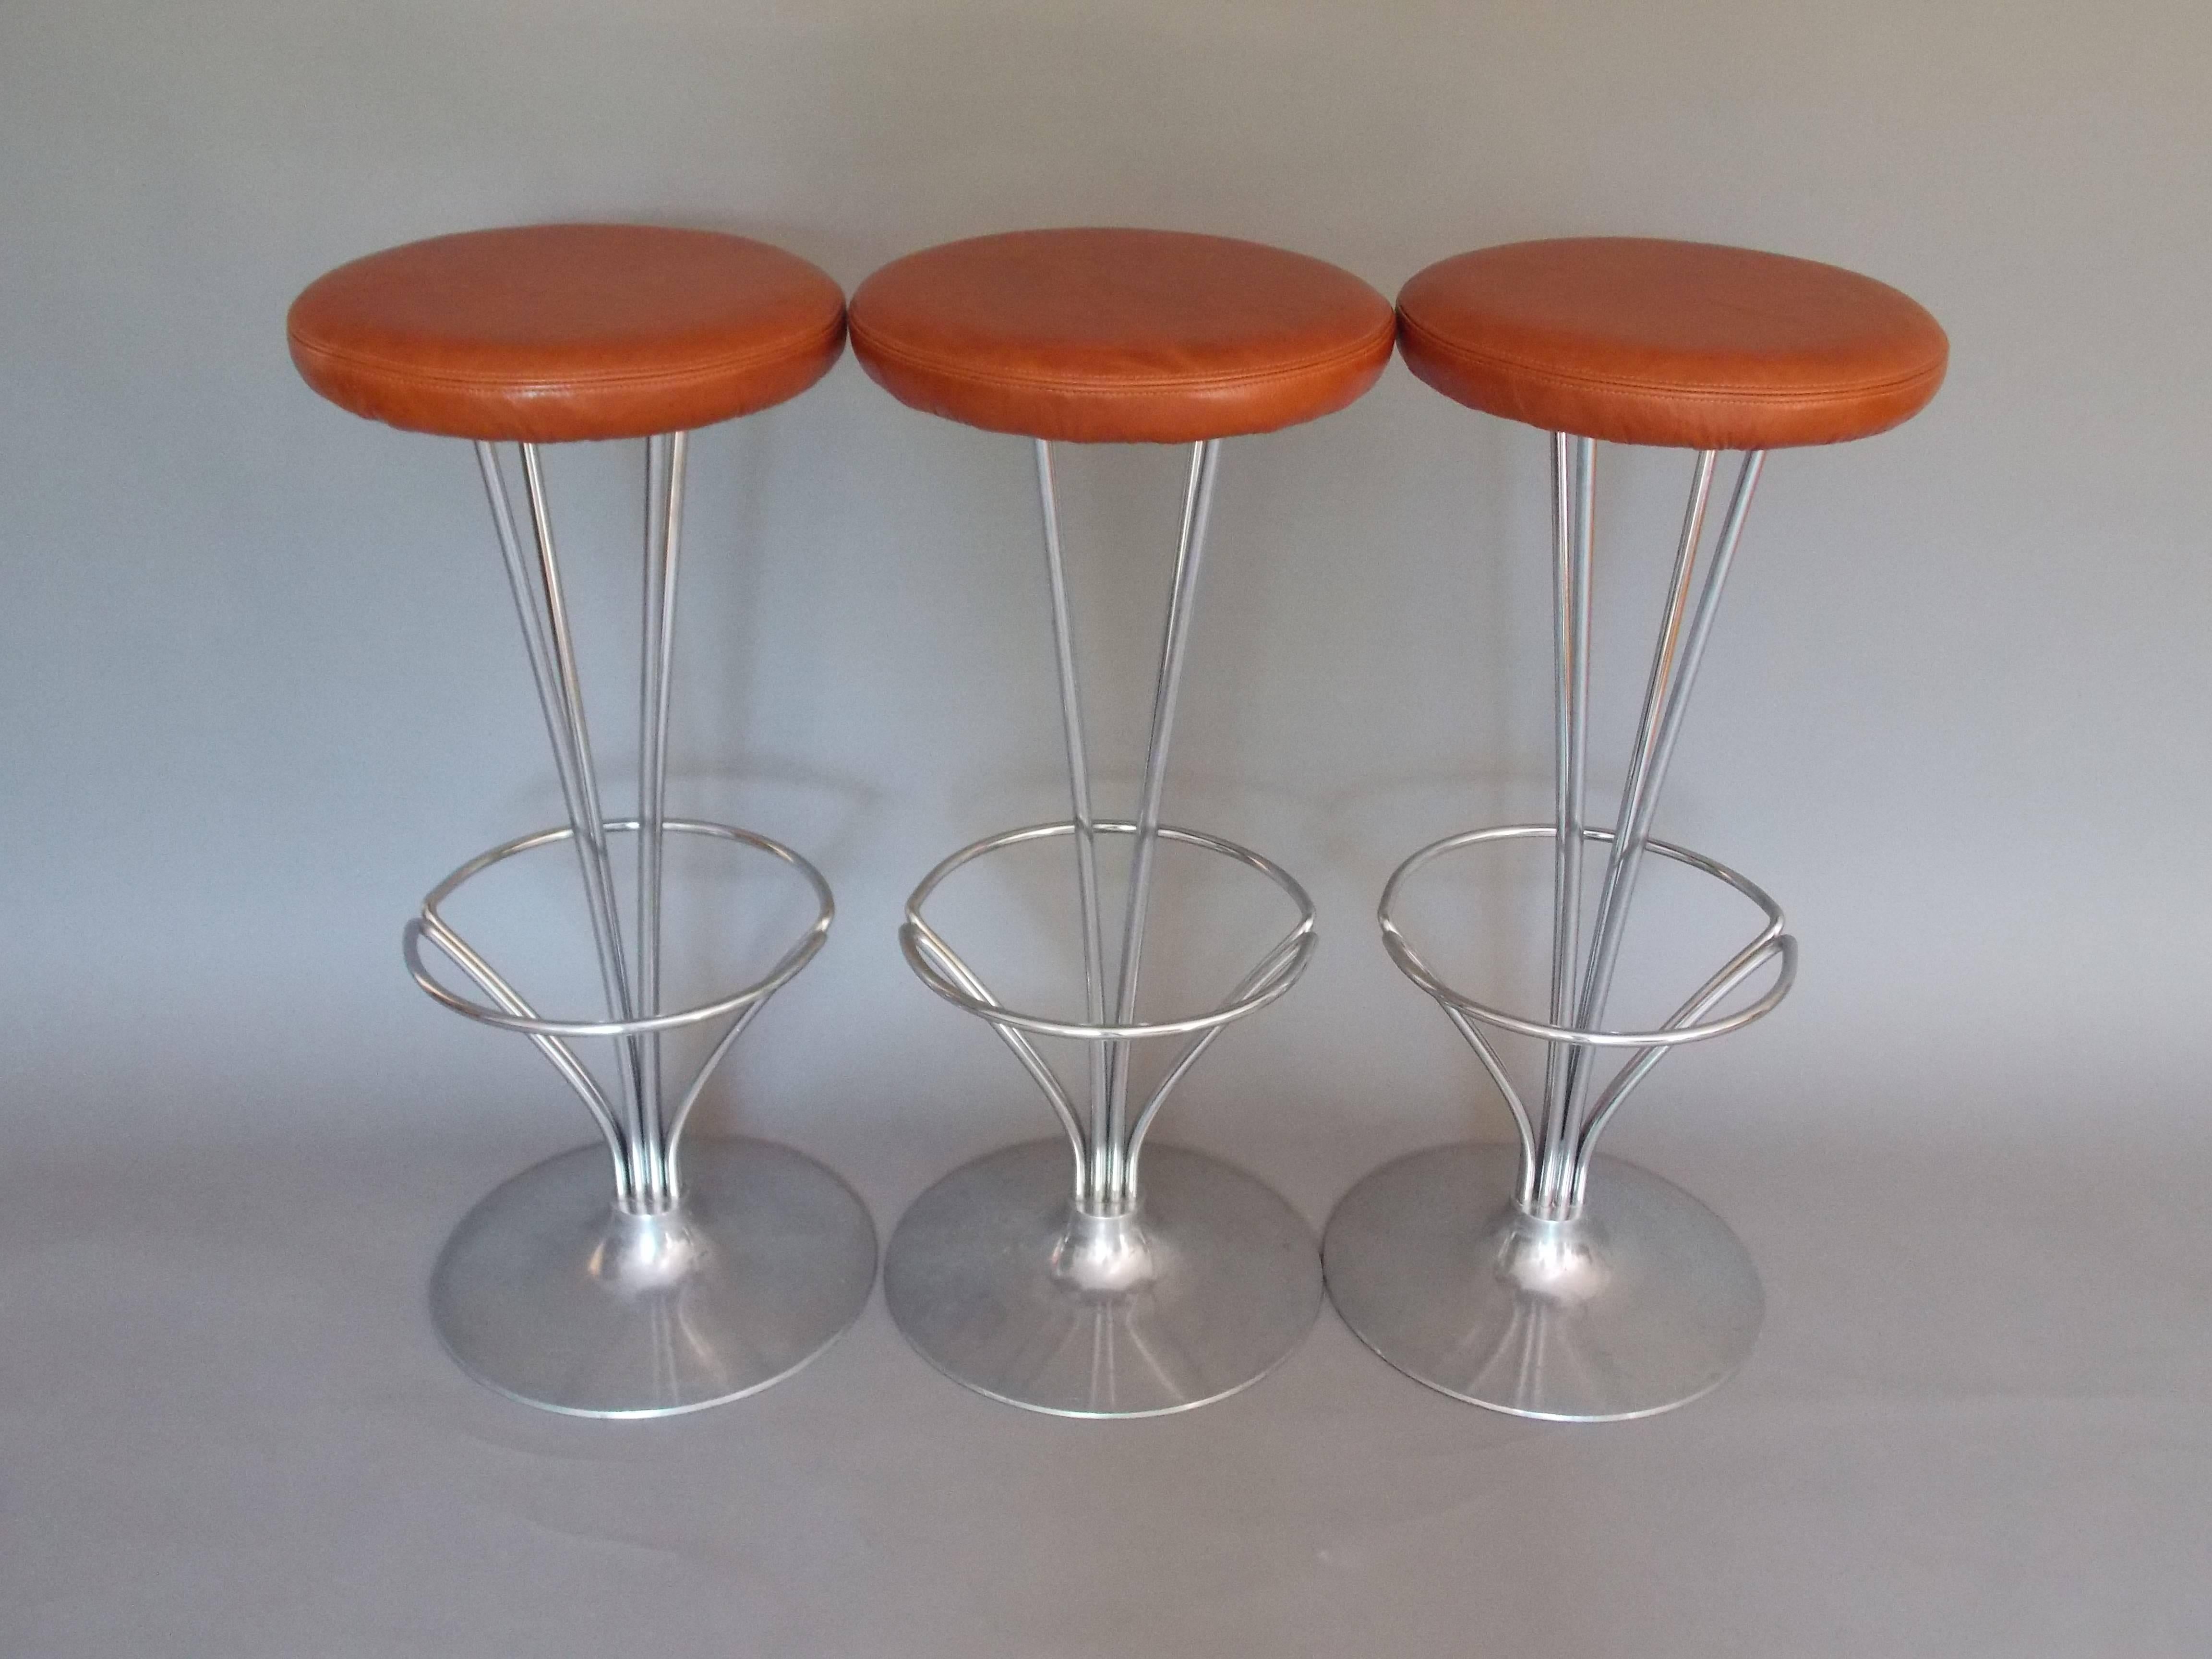 A nice set of three architectural Danish designs.
Made of steel with reupholstered distressed cognac hue leather.
The steel shows minor wear / patina consistent with age.
No damage or repairs.
Solid and sturdy.
    